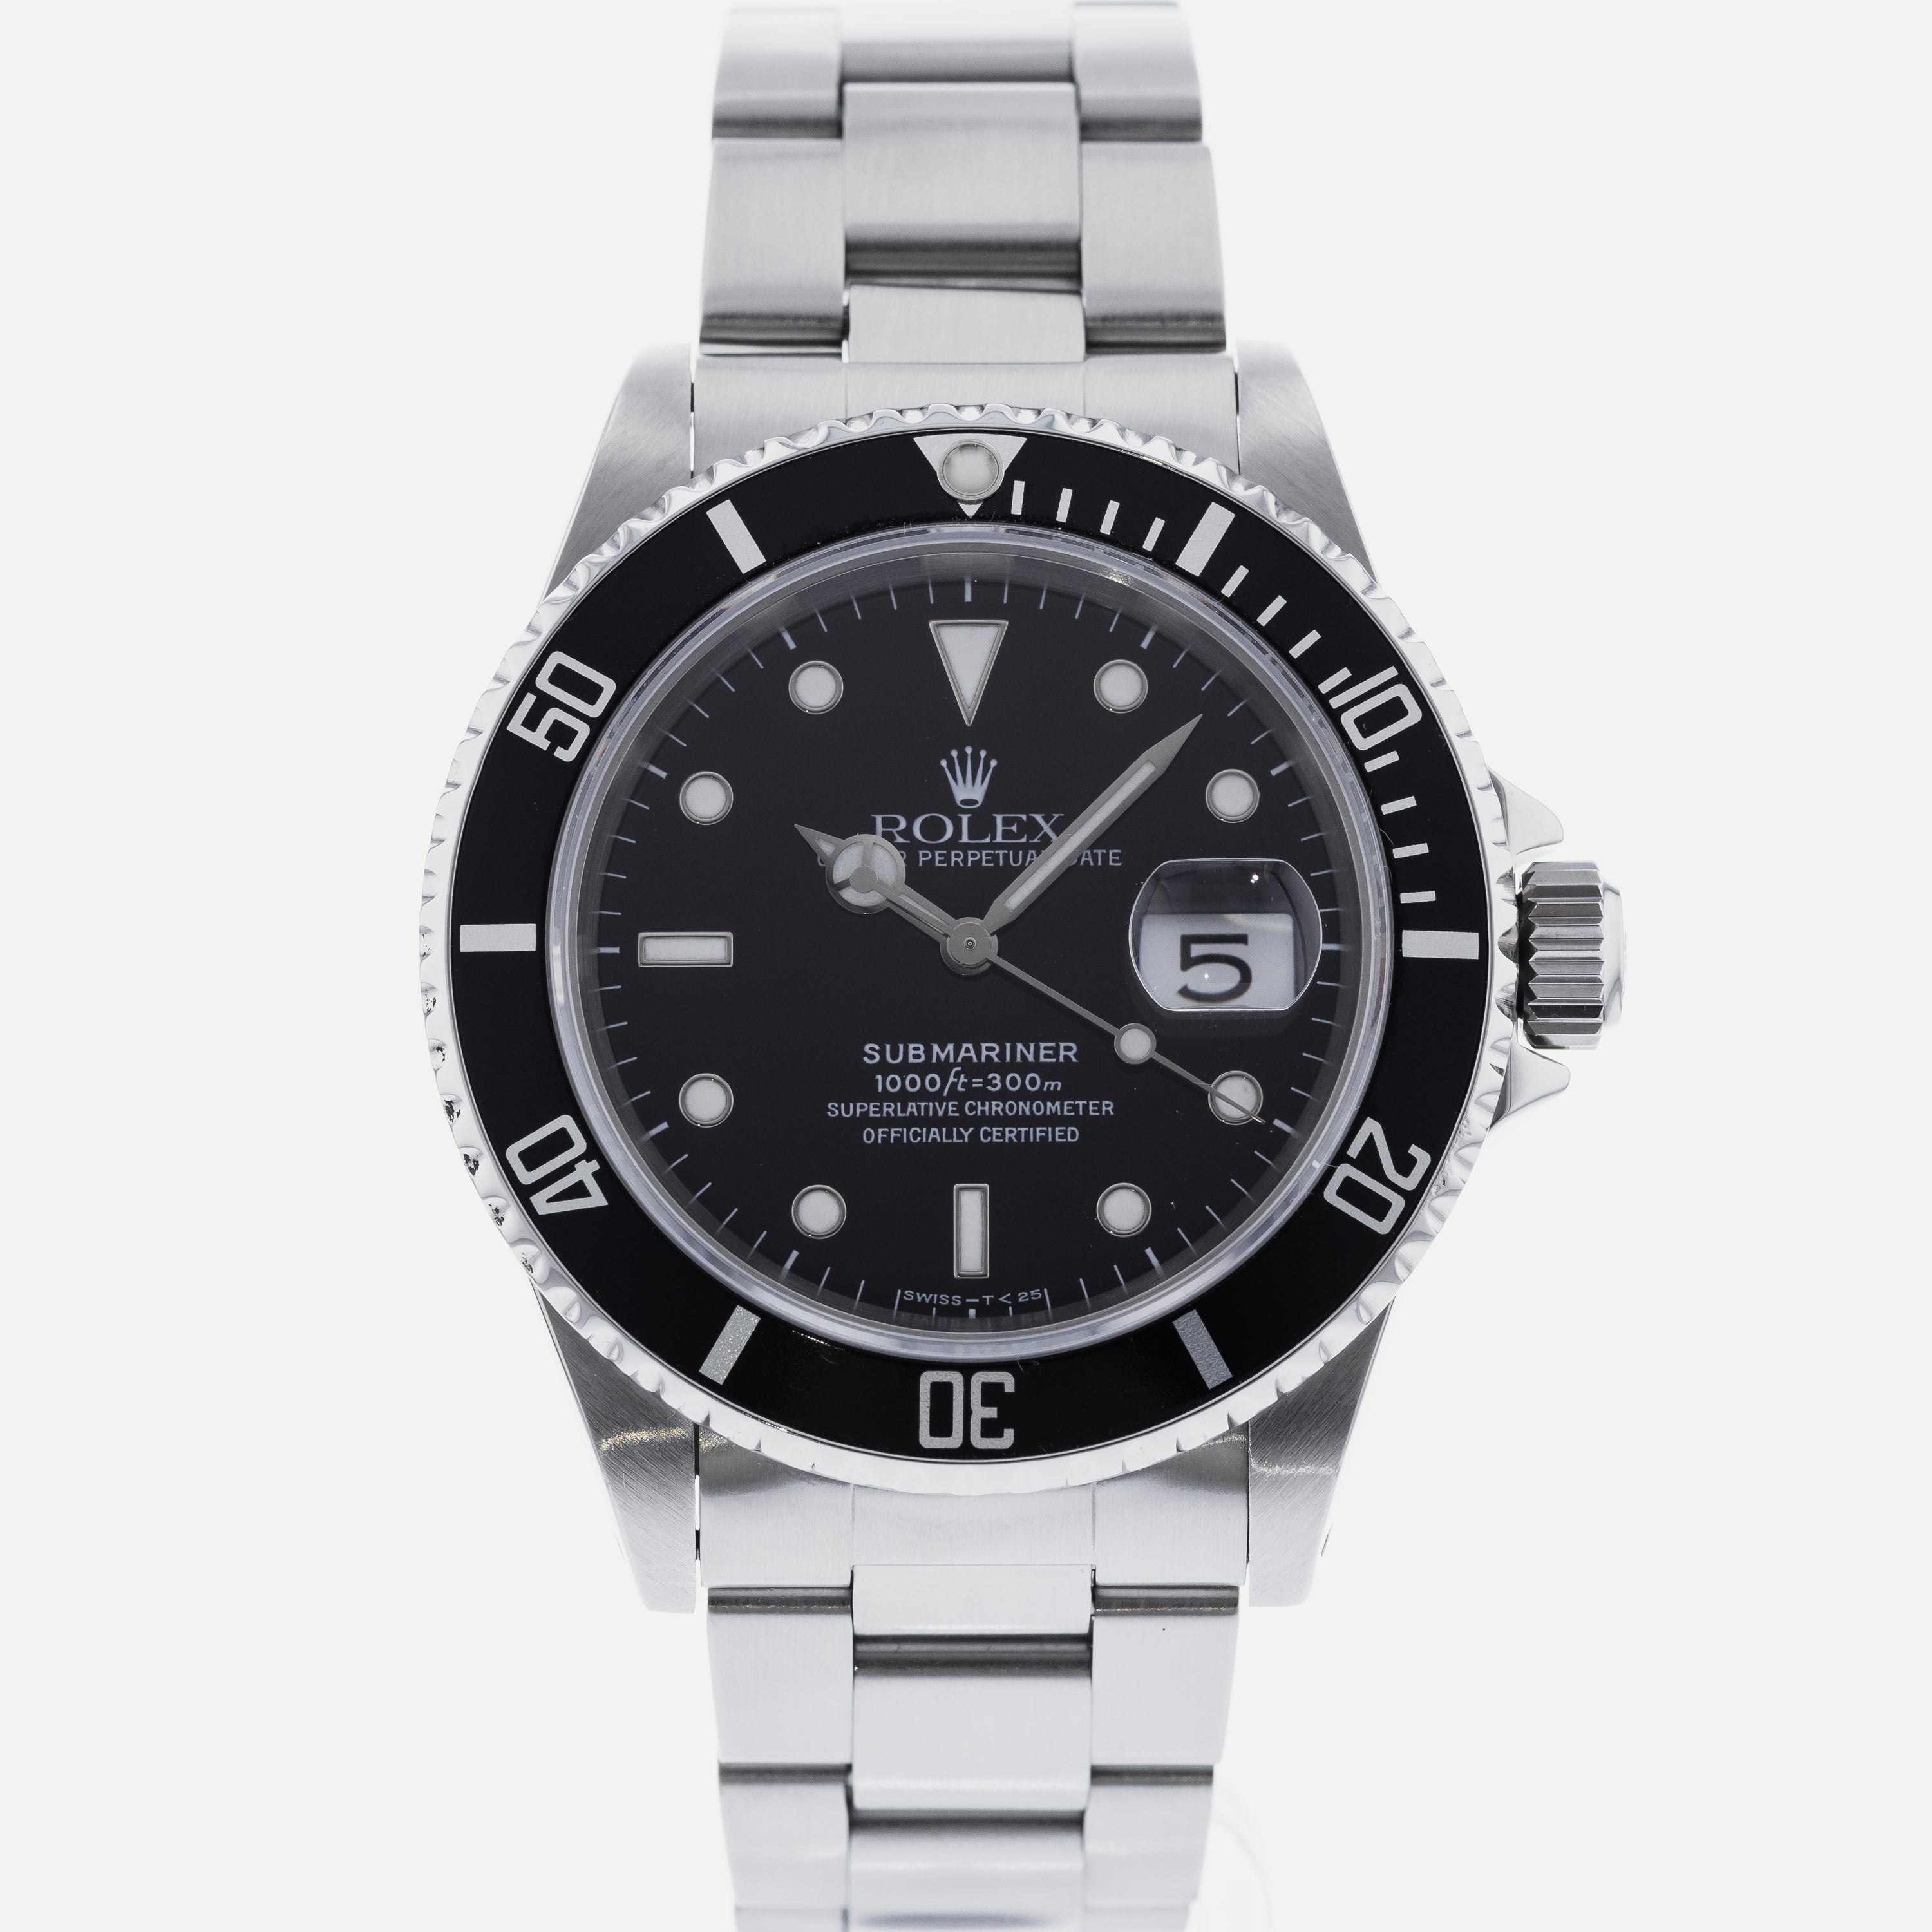 Emotion Installere Kvadrant Authentic Used Rolex Submariner 16610 Watch (10-10-ROL-RKGL3F)